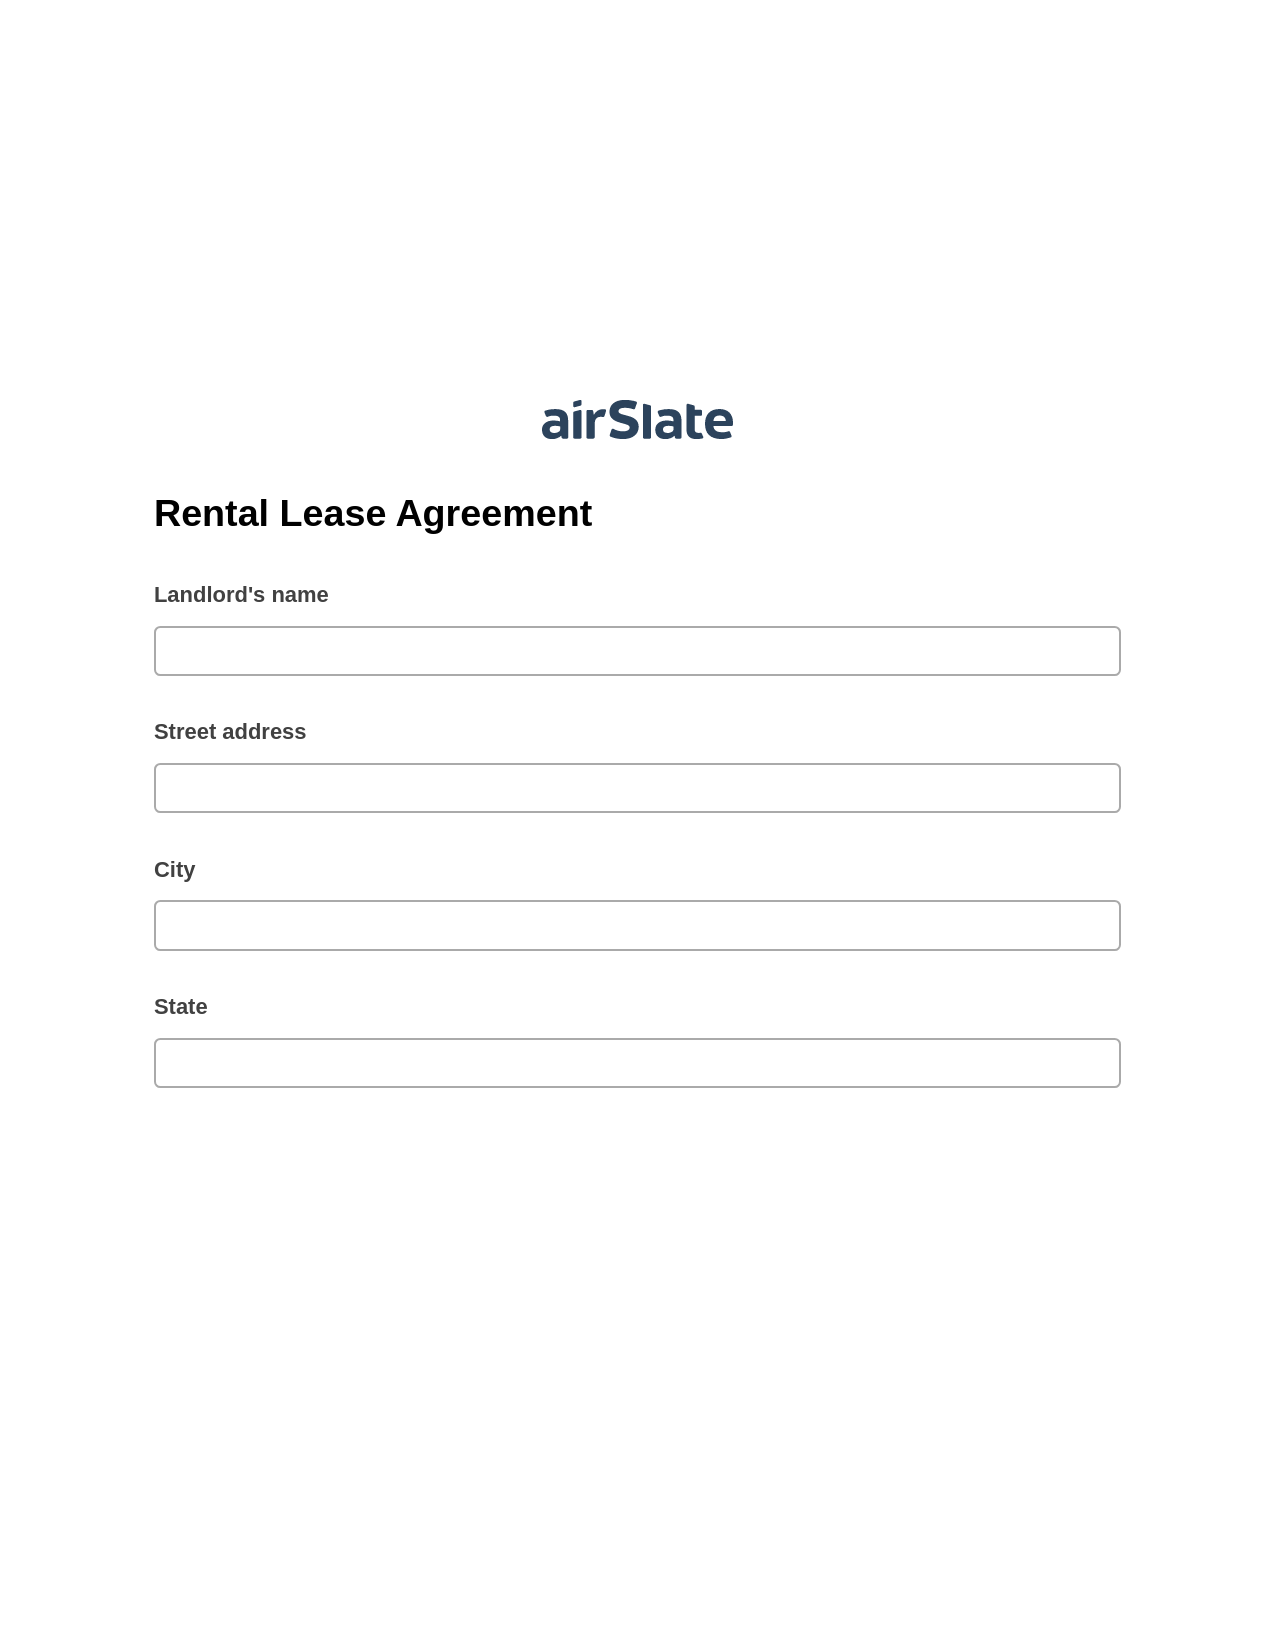 Multirole Rental Lease Agreement Pre-fill from NetSuite Records Bot, Export to MS Dynamics 365 Bot, Export to Excel 365 Bot